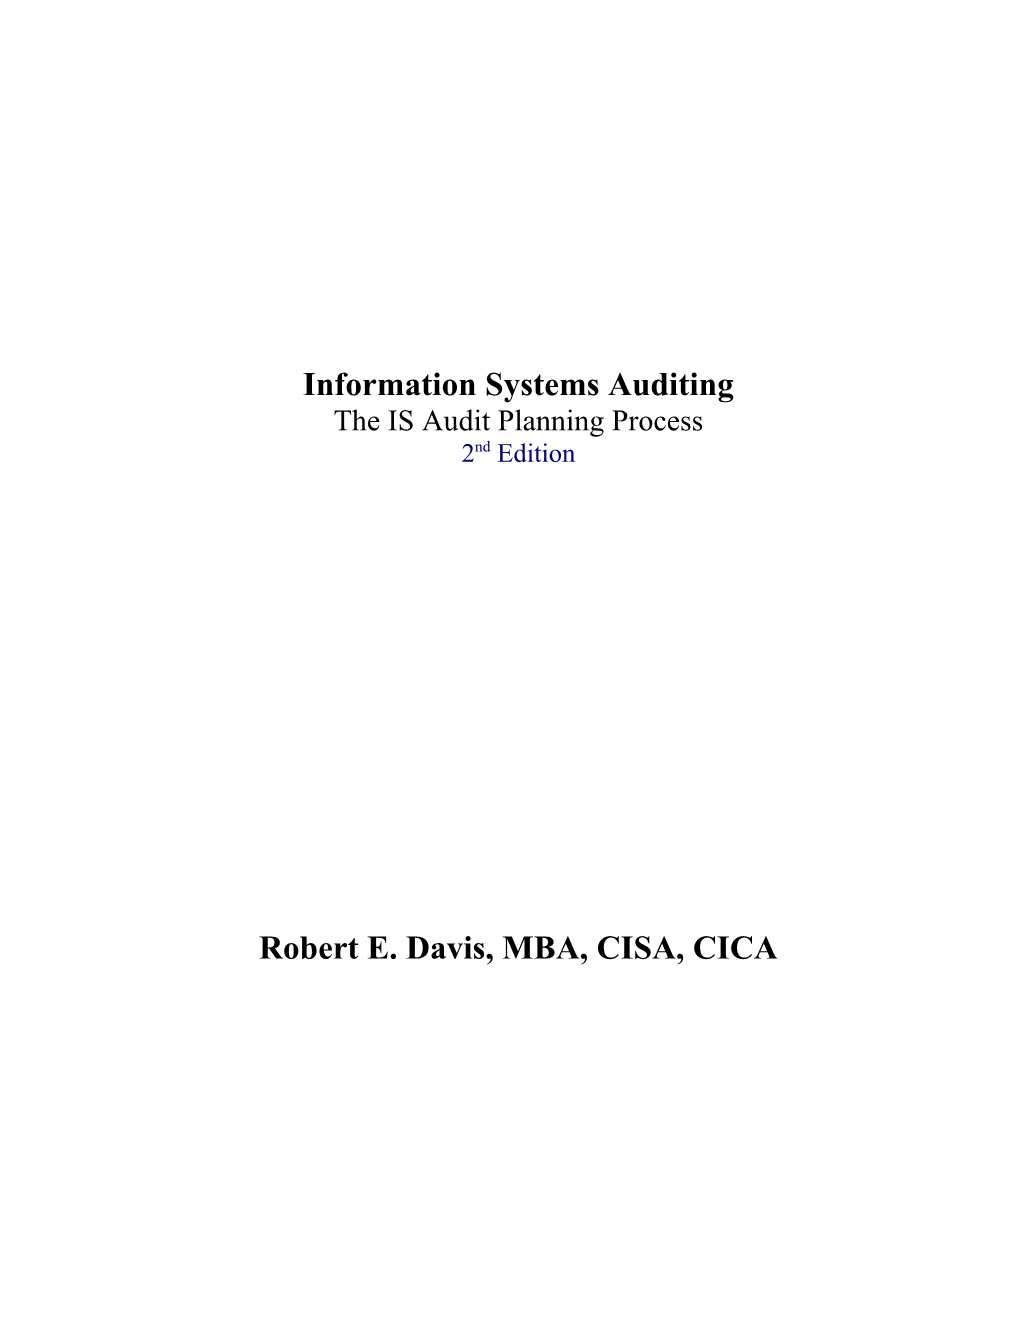 Information Systems Auditing - the IS Audit Planning Process